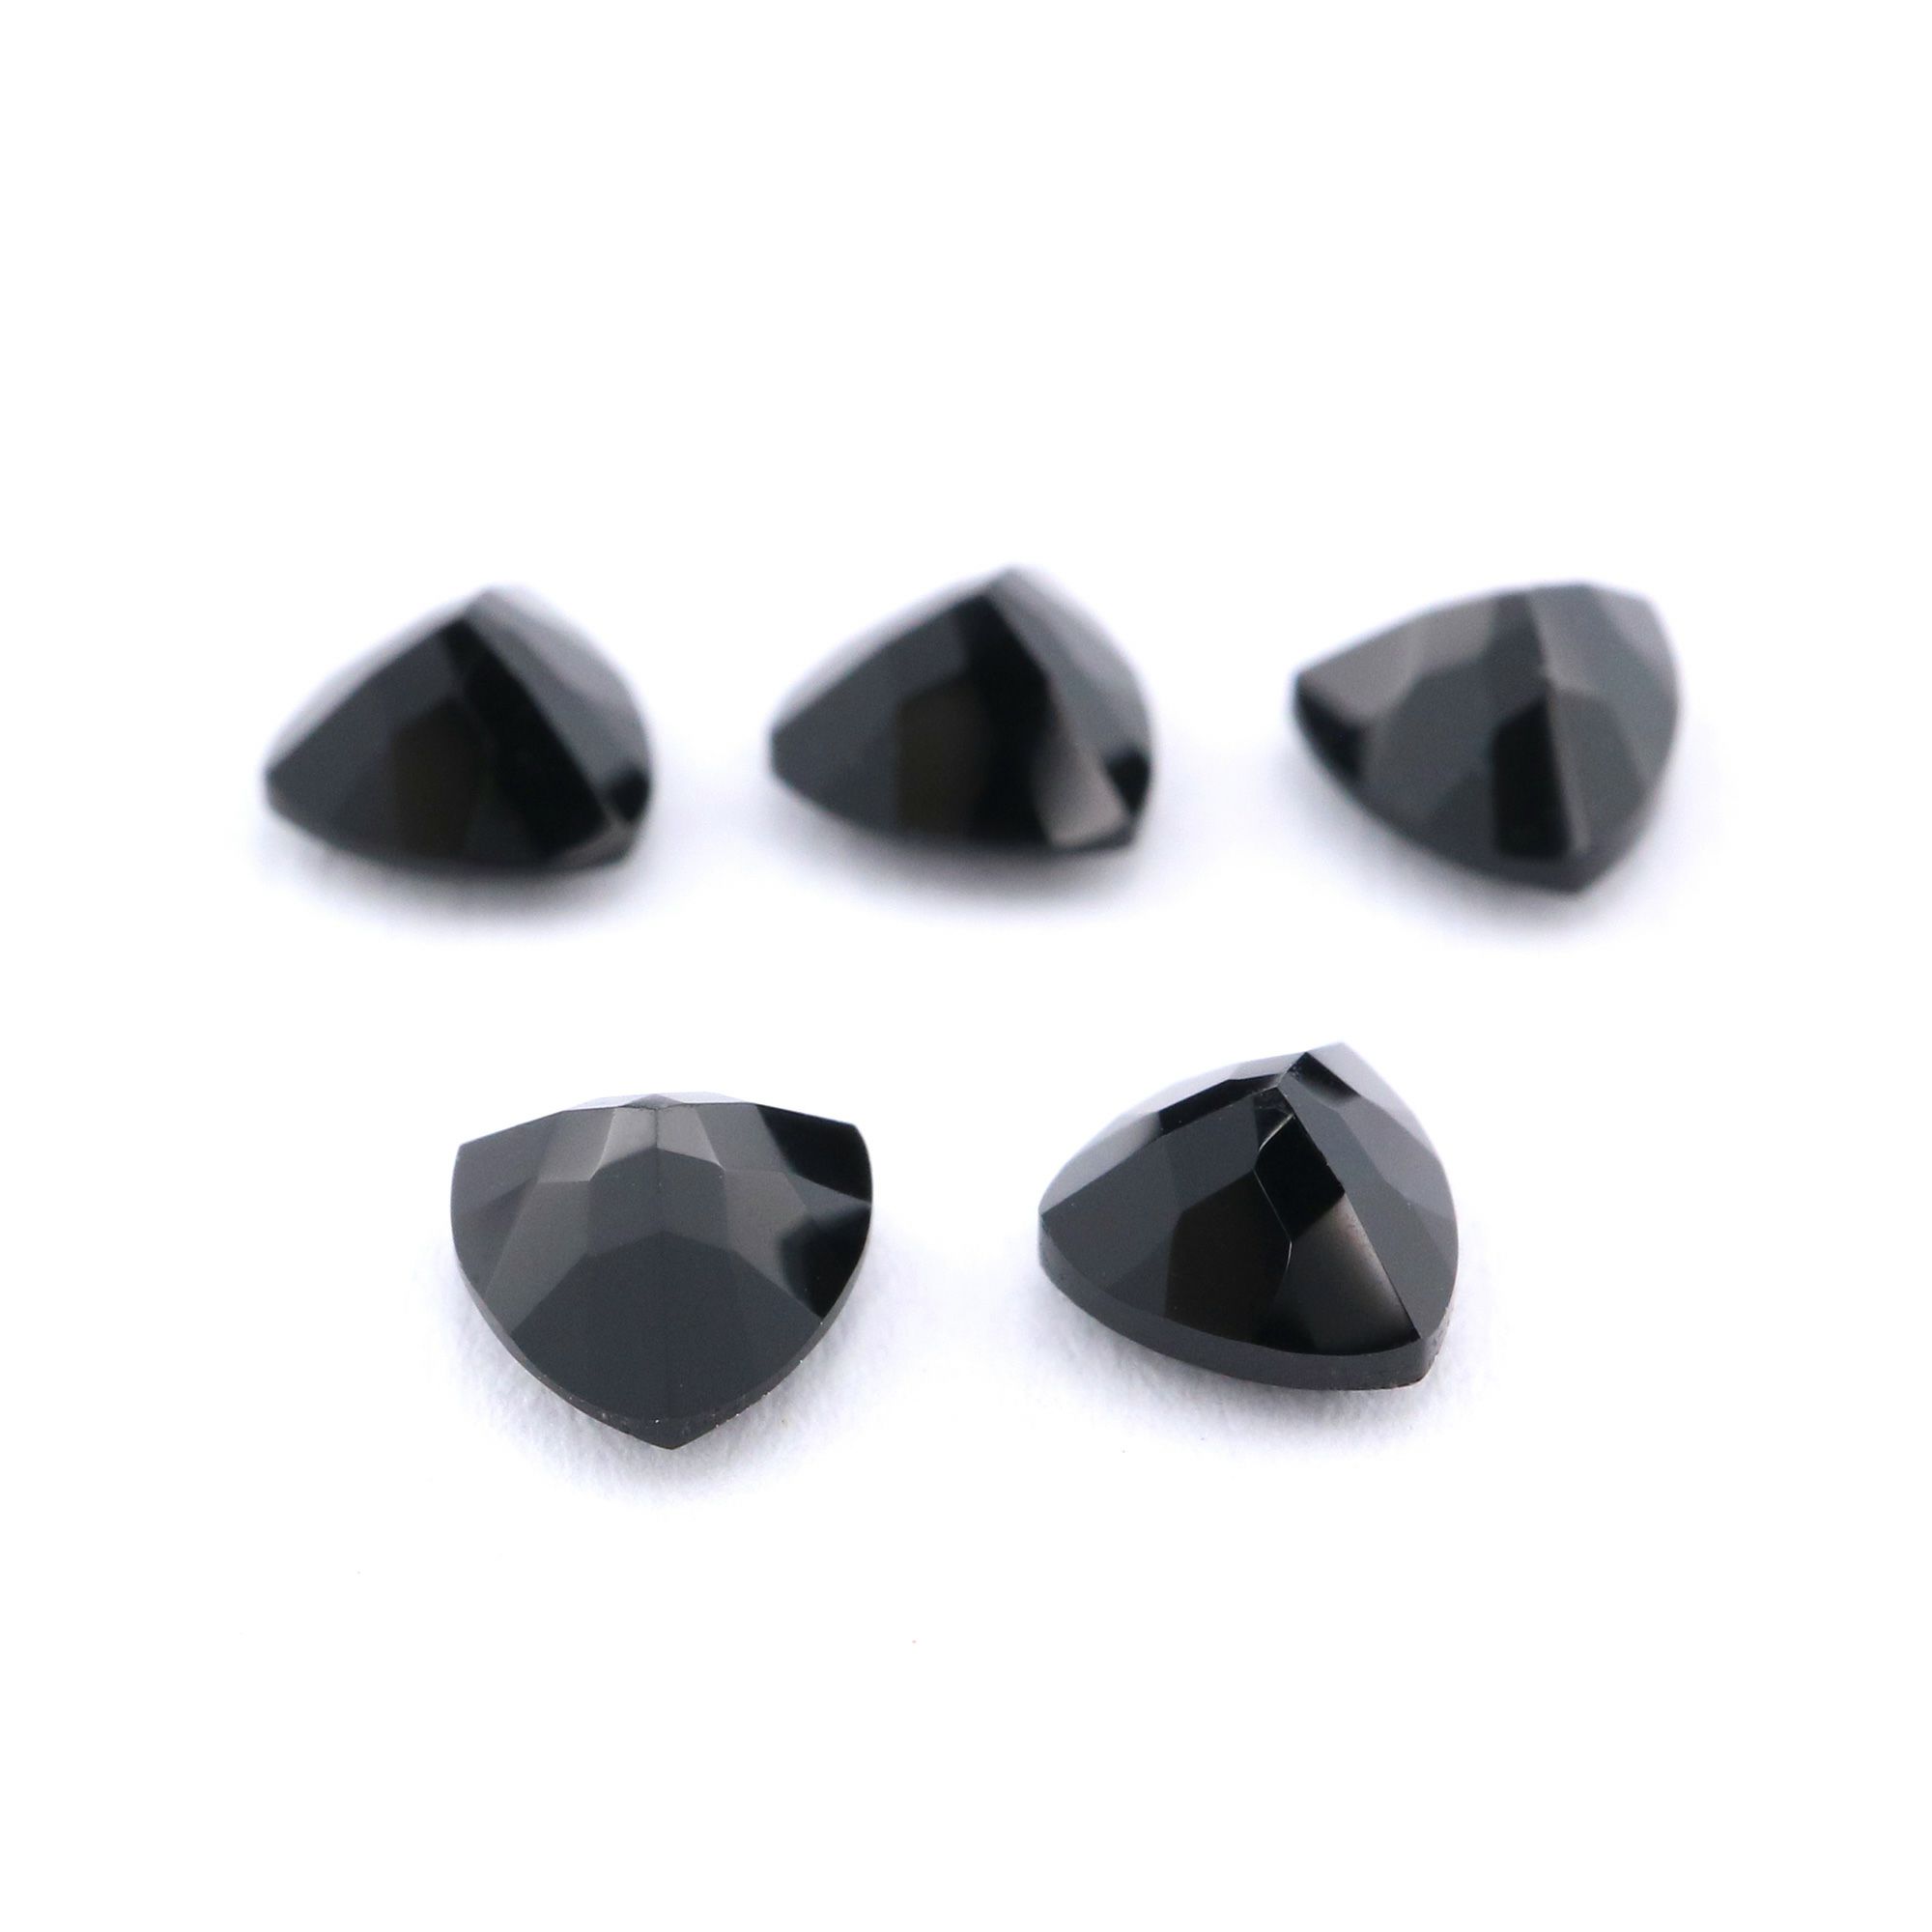 5Pcs 4MM Natural Trillion Black Onyx Faceted Cut Triangle Loose Gemstone Nature Semi Precious Stone DIY Jewelry Supplies 4160028 - Click Image to Close